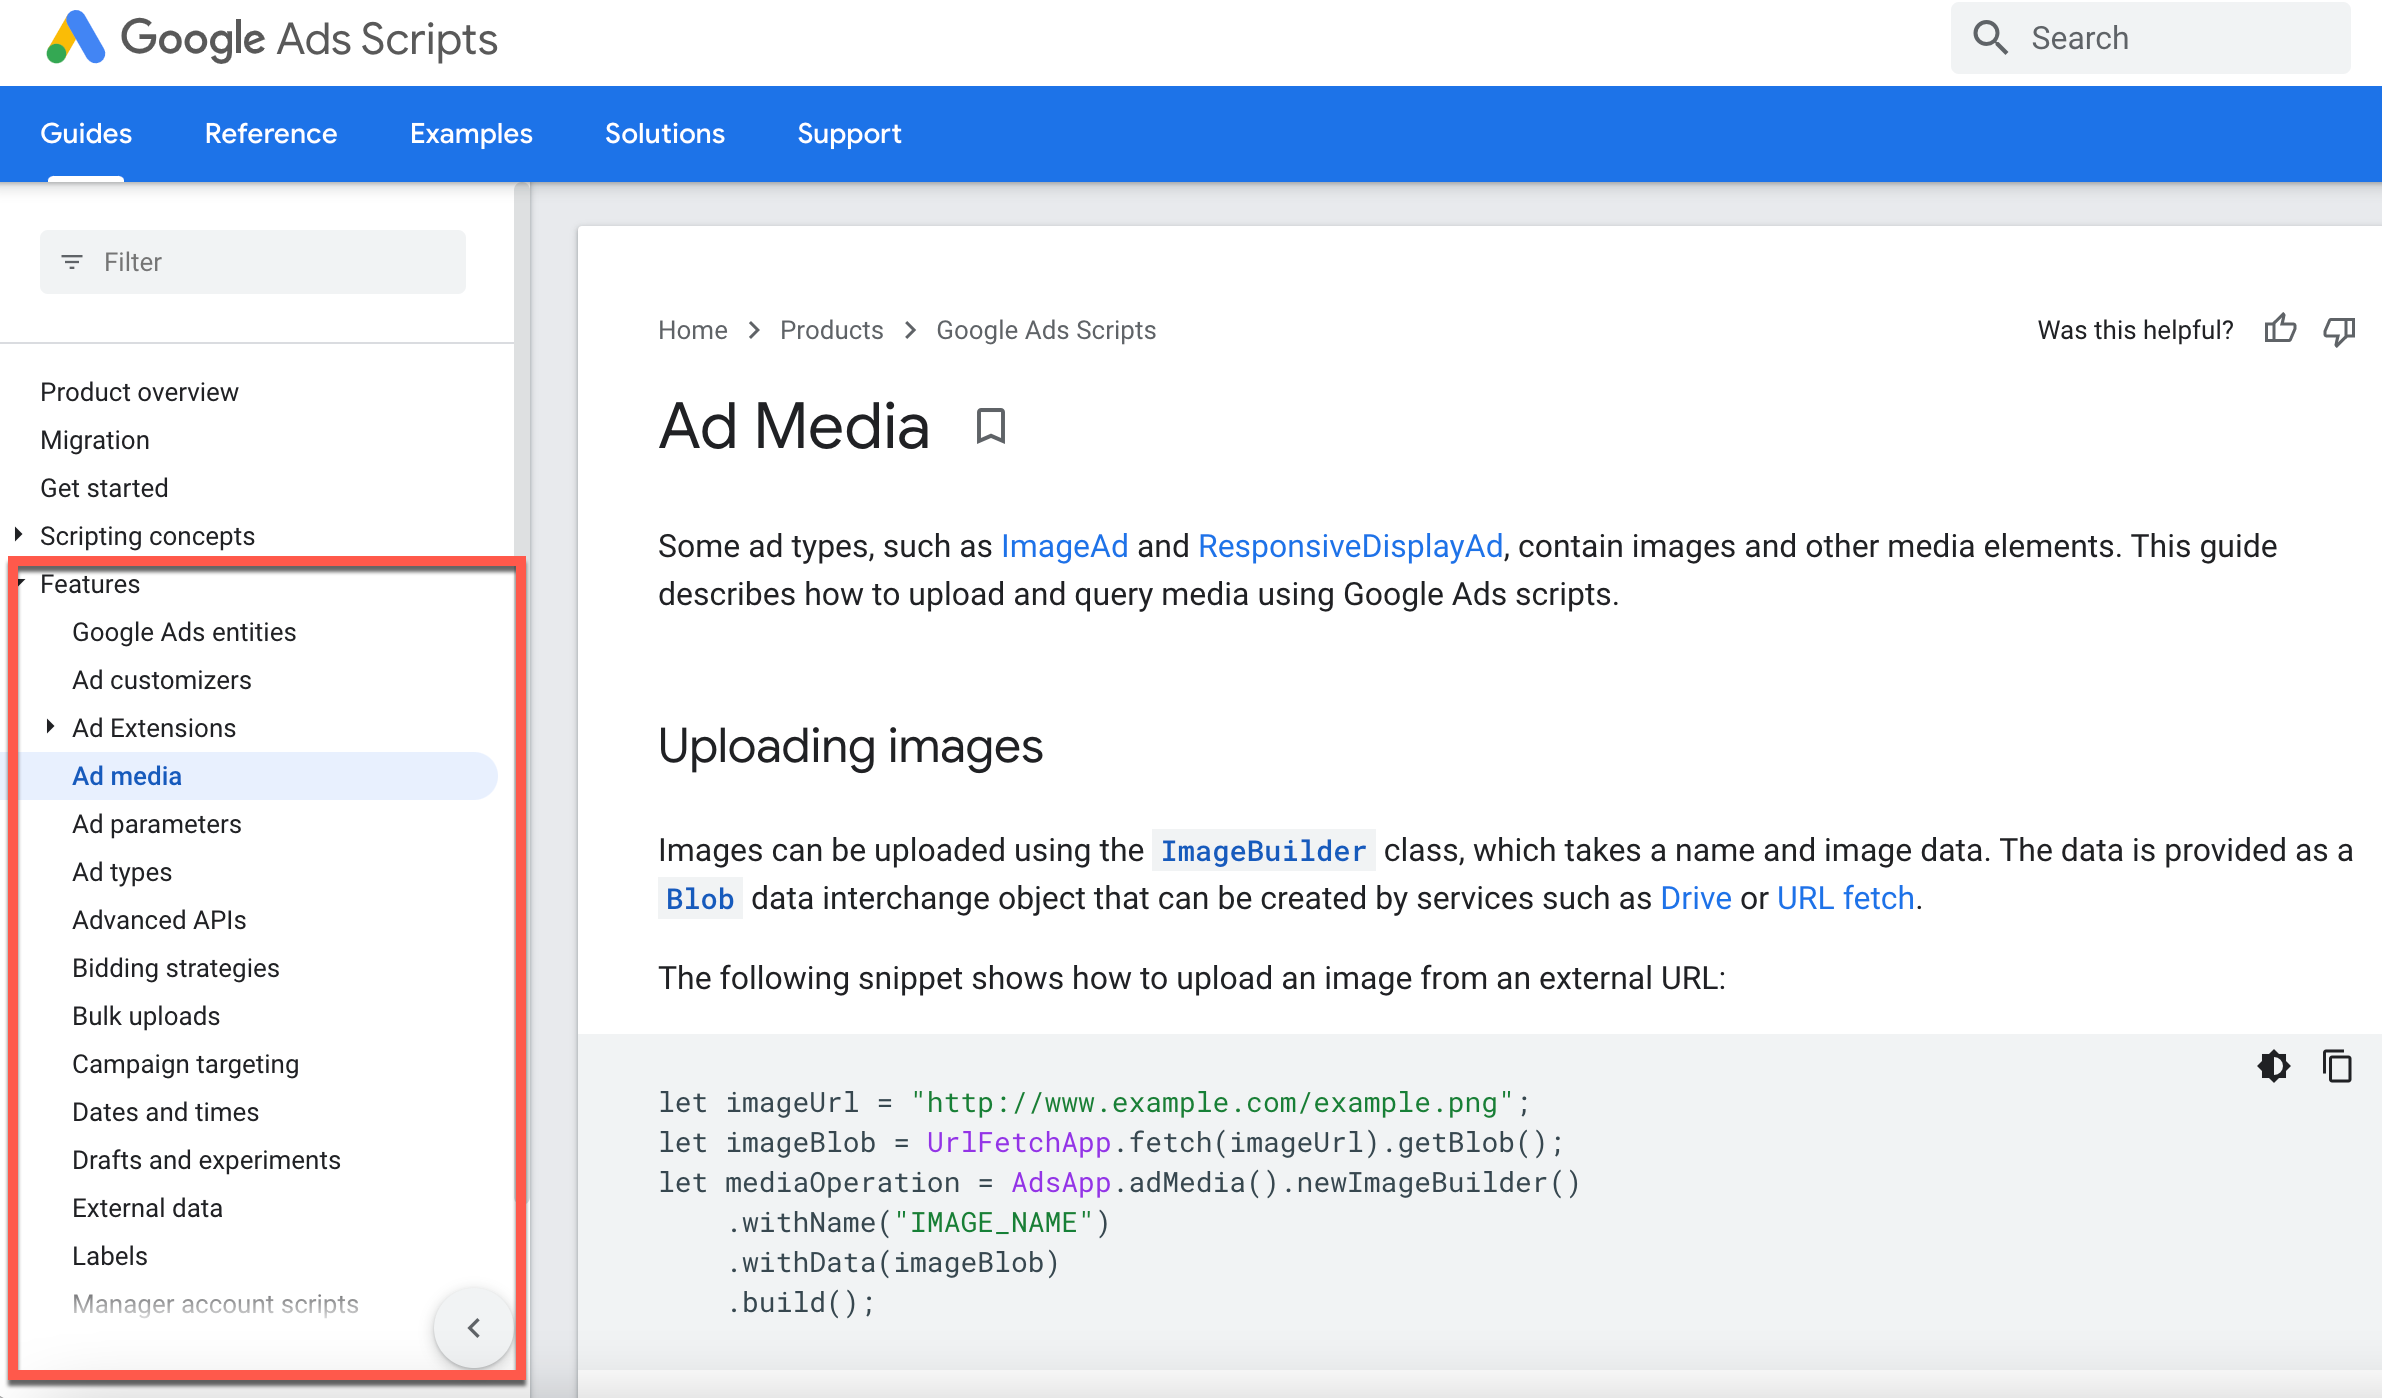 Features on the Google Ads Script page